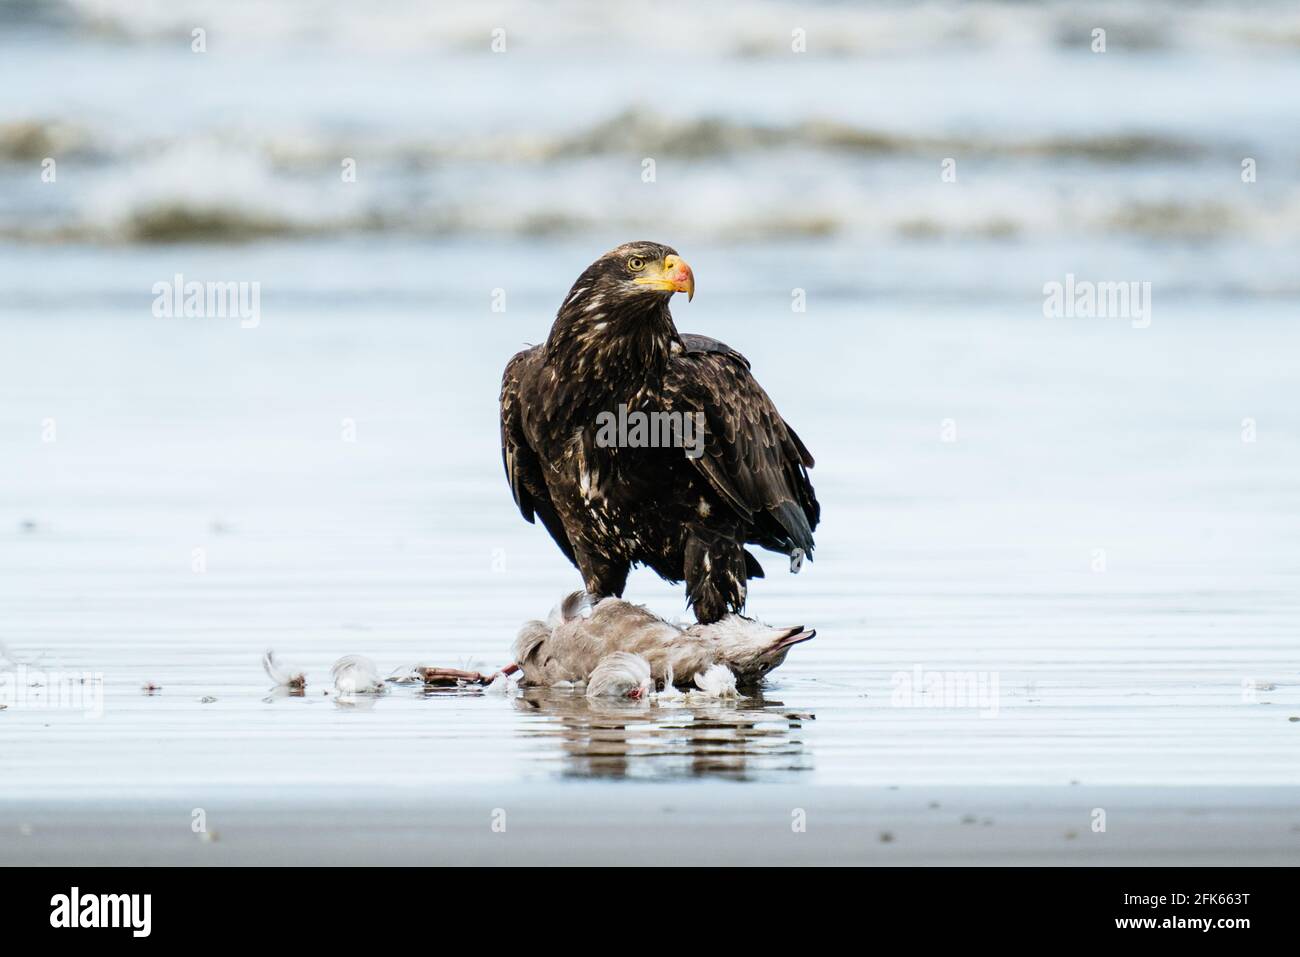 A bald eagle on the beach in Westport, Washington State Stock Photo